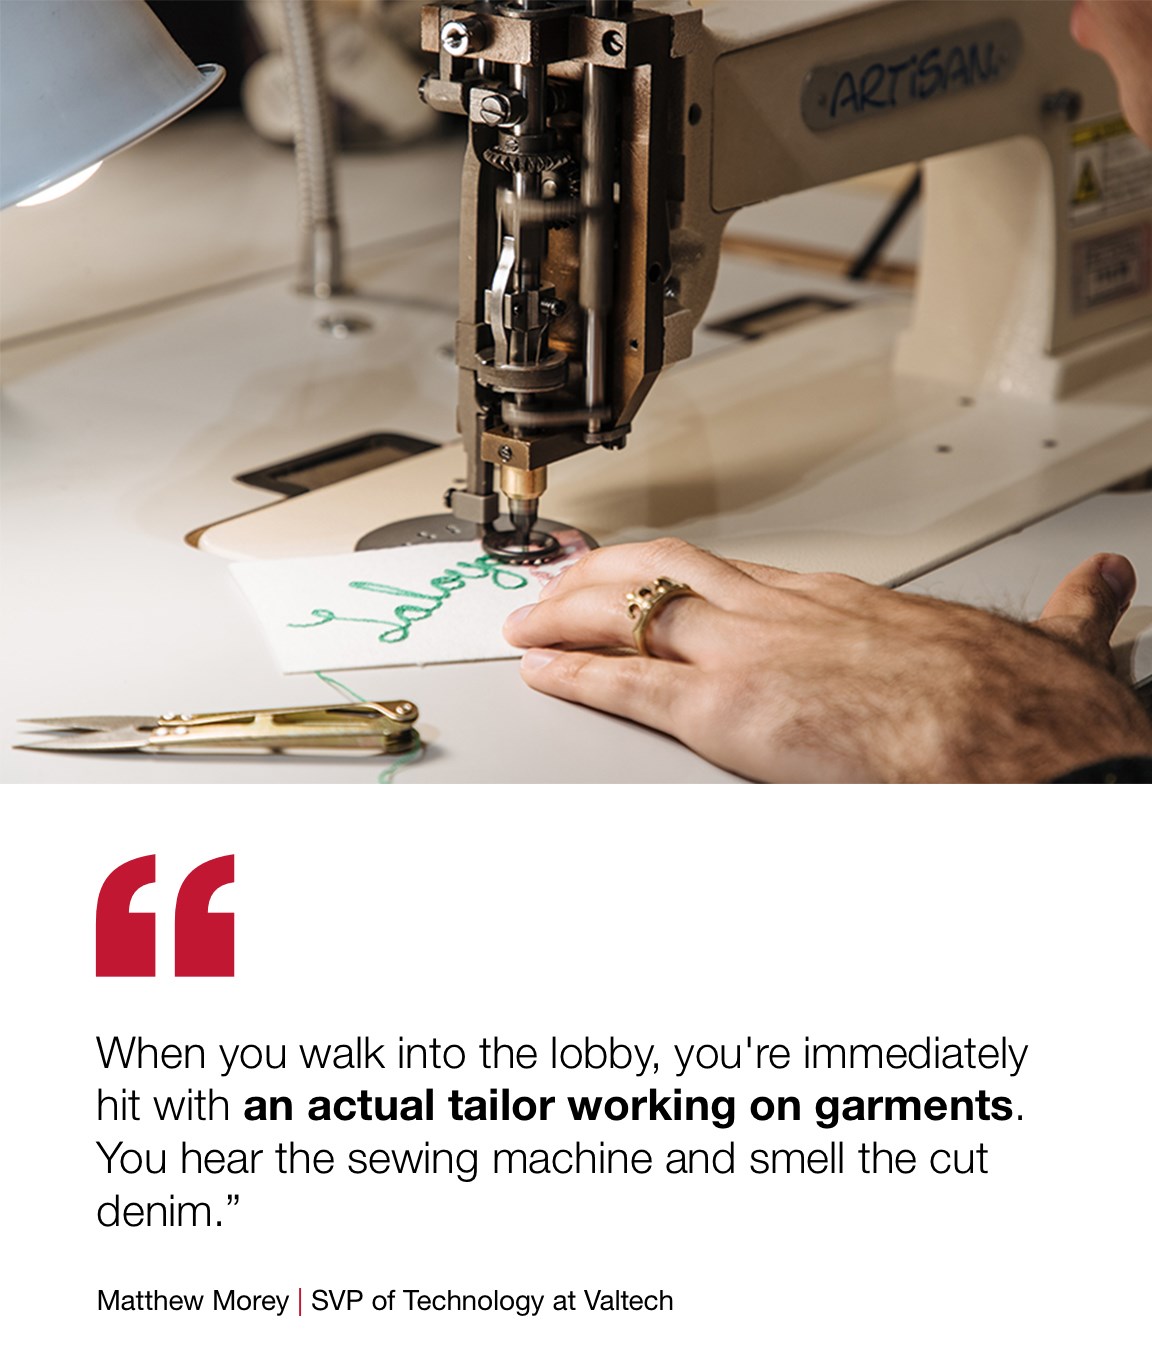 Closeup image of a Tailor embroidering something at a sewing machine with quote from Matthew Morey, SVP of Technology at Valtech: When you walk into the lobby, you'reimmediately hit with an actual tailorworking on garments. You hear the sewing machine and smell the cut denim.” 